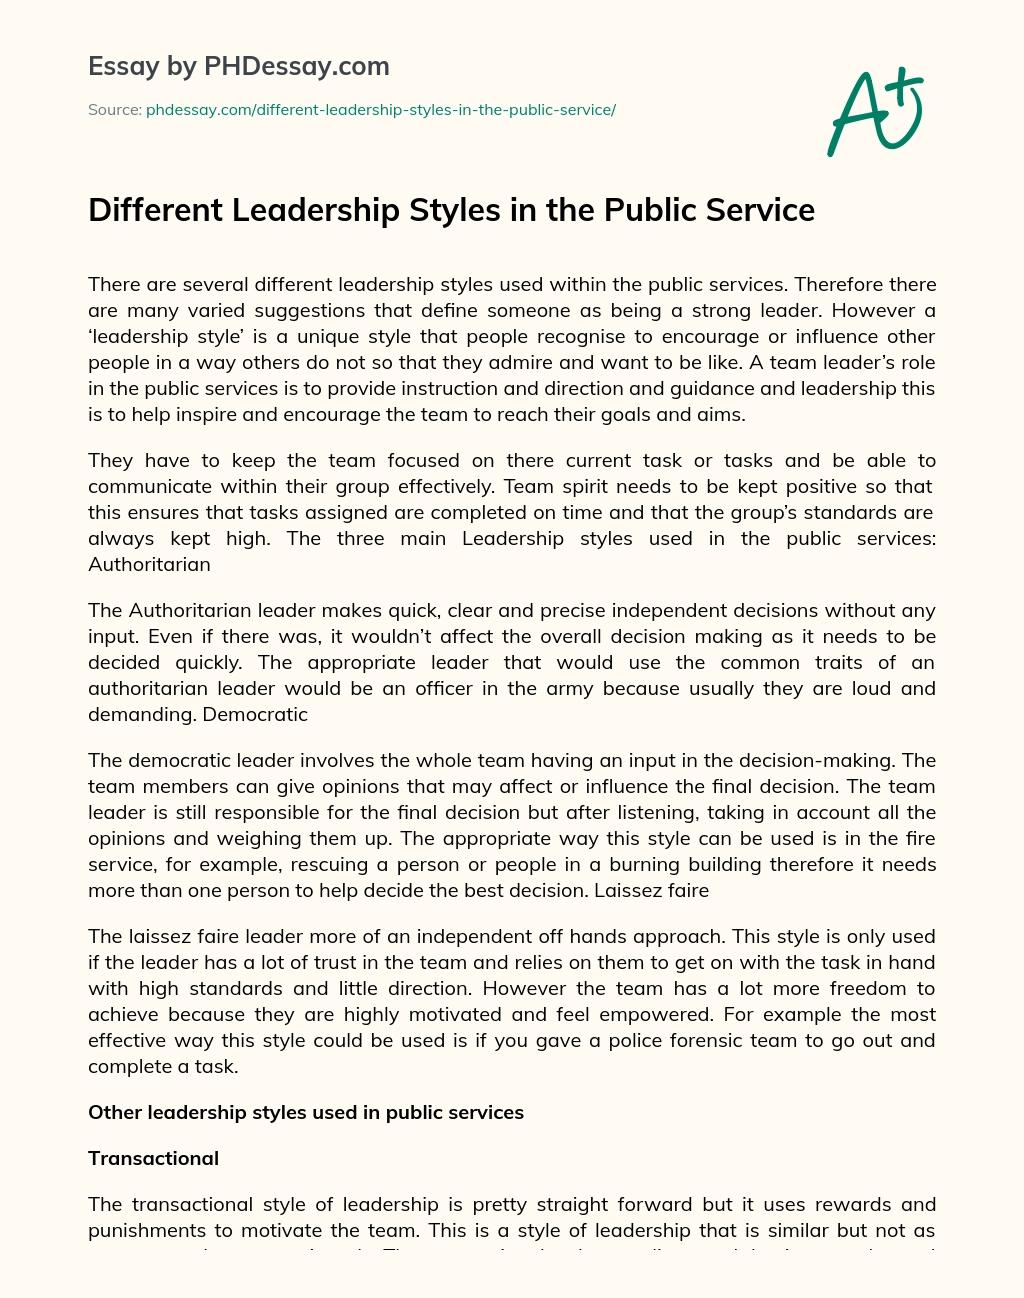 Different Leadership Styles in the Public Service essay